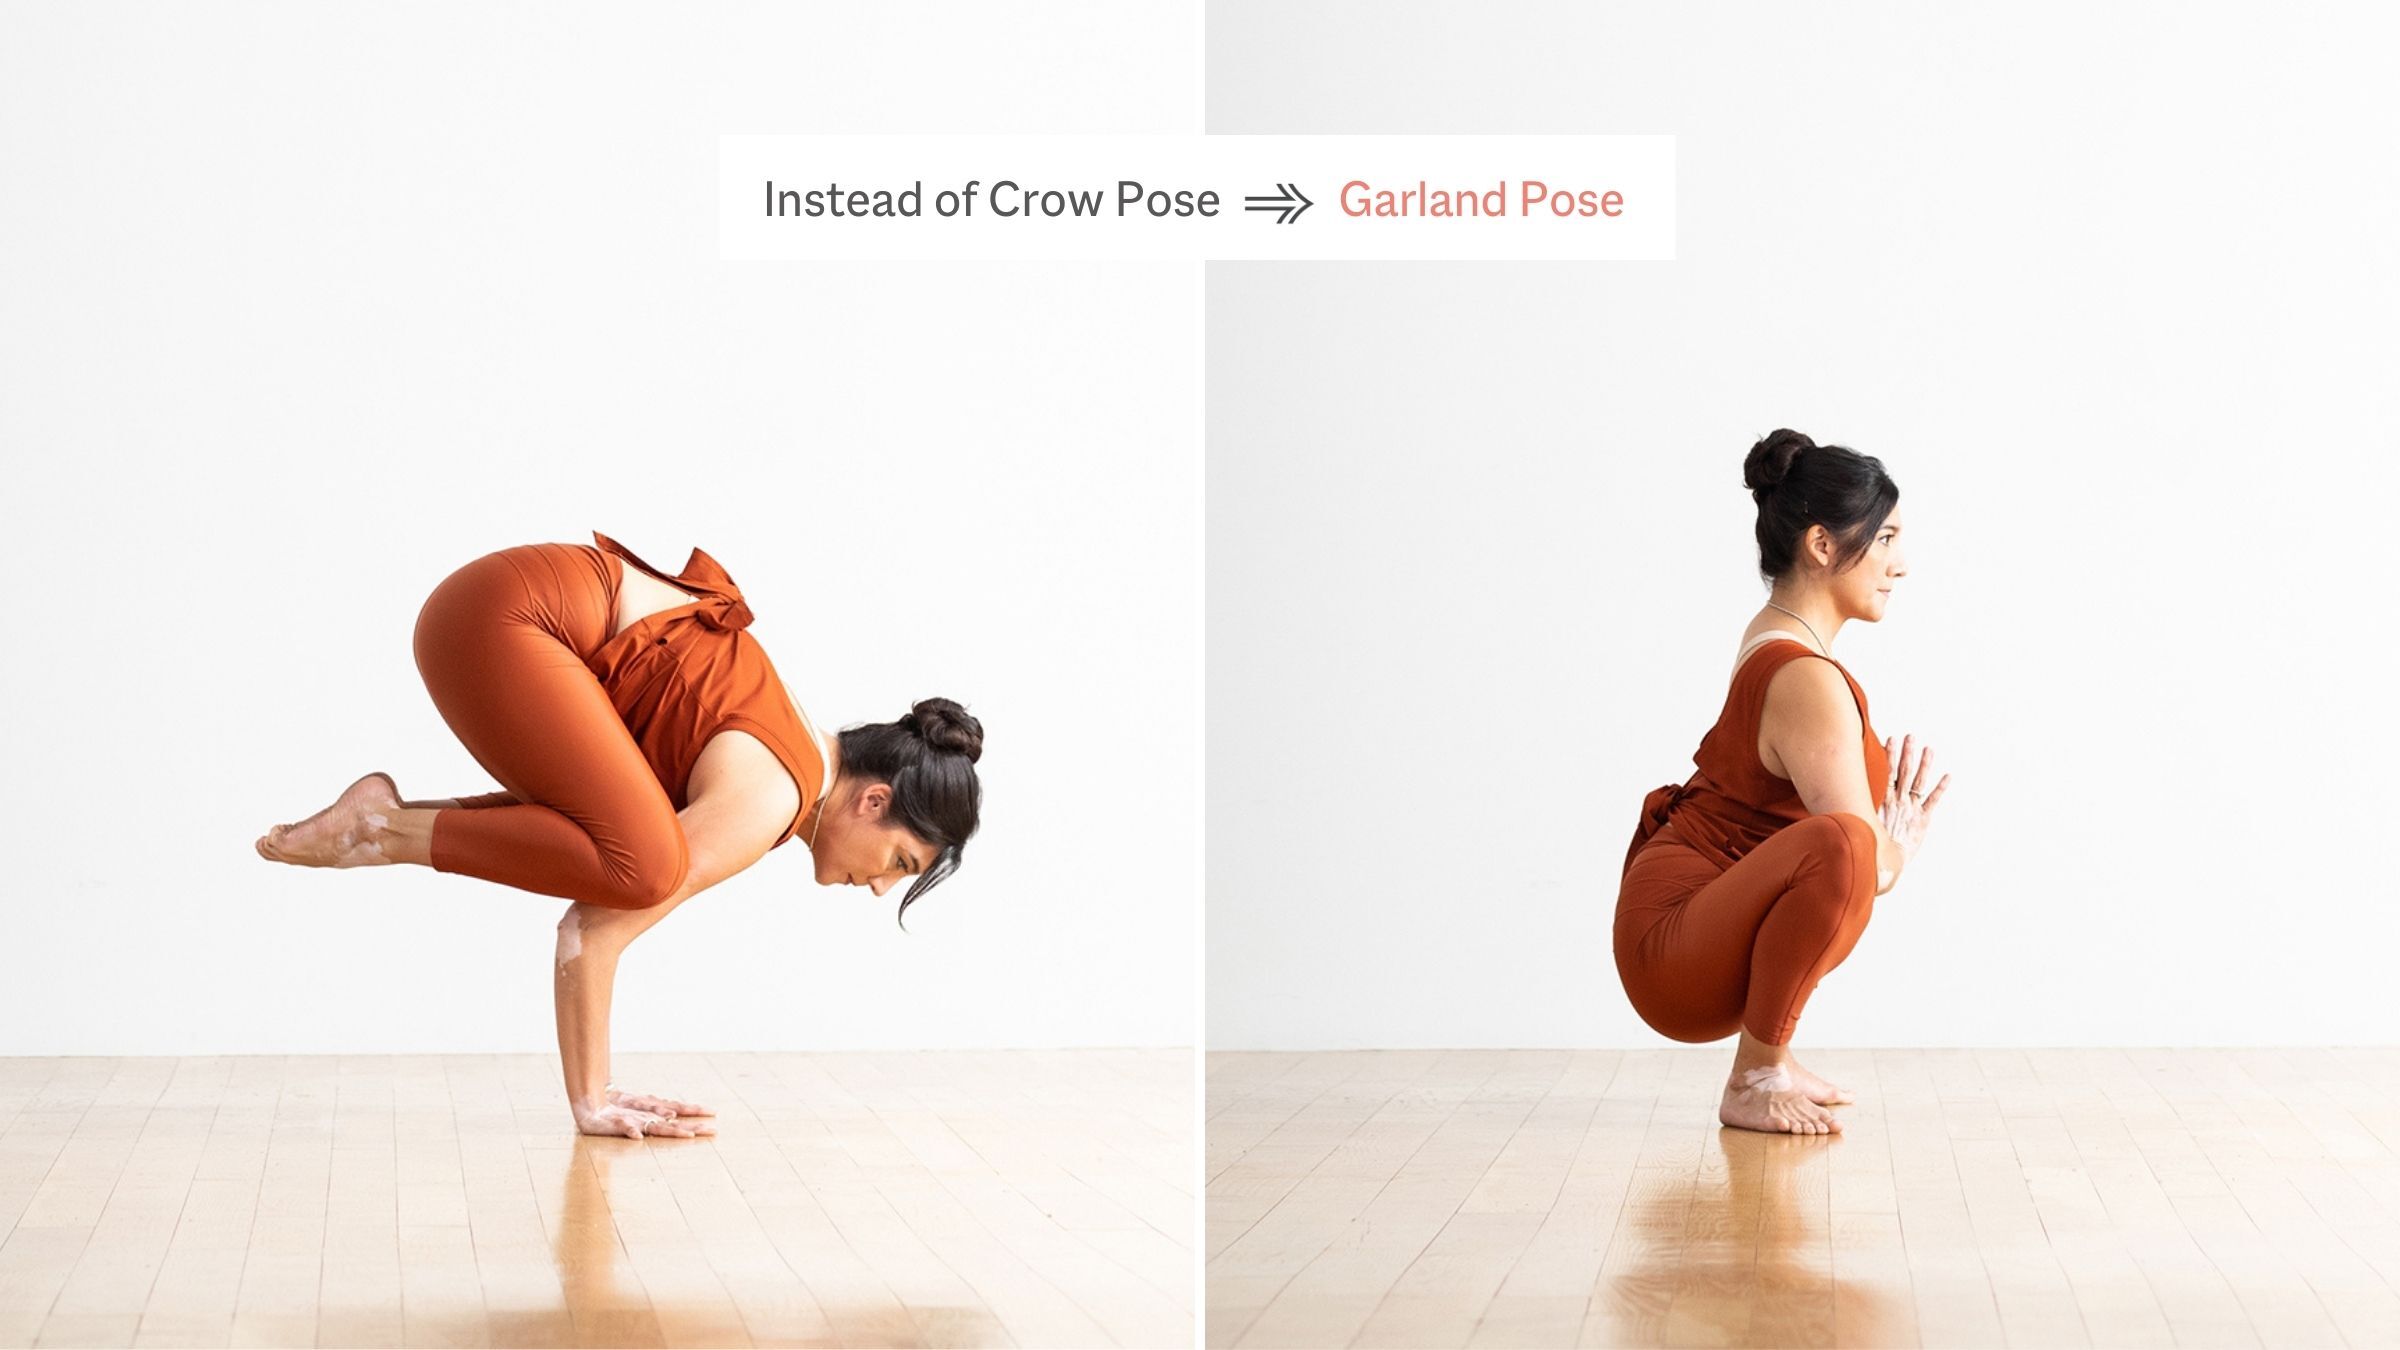 How Do You Do Crow Pose Without Your Knees Hurting Your Arms? - DoYou